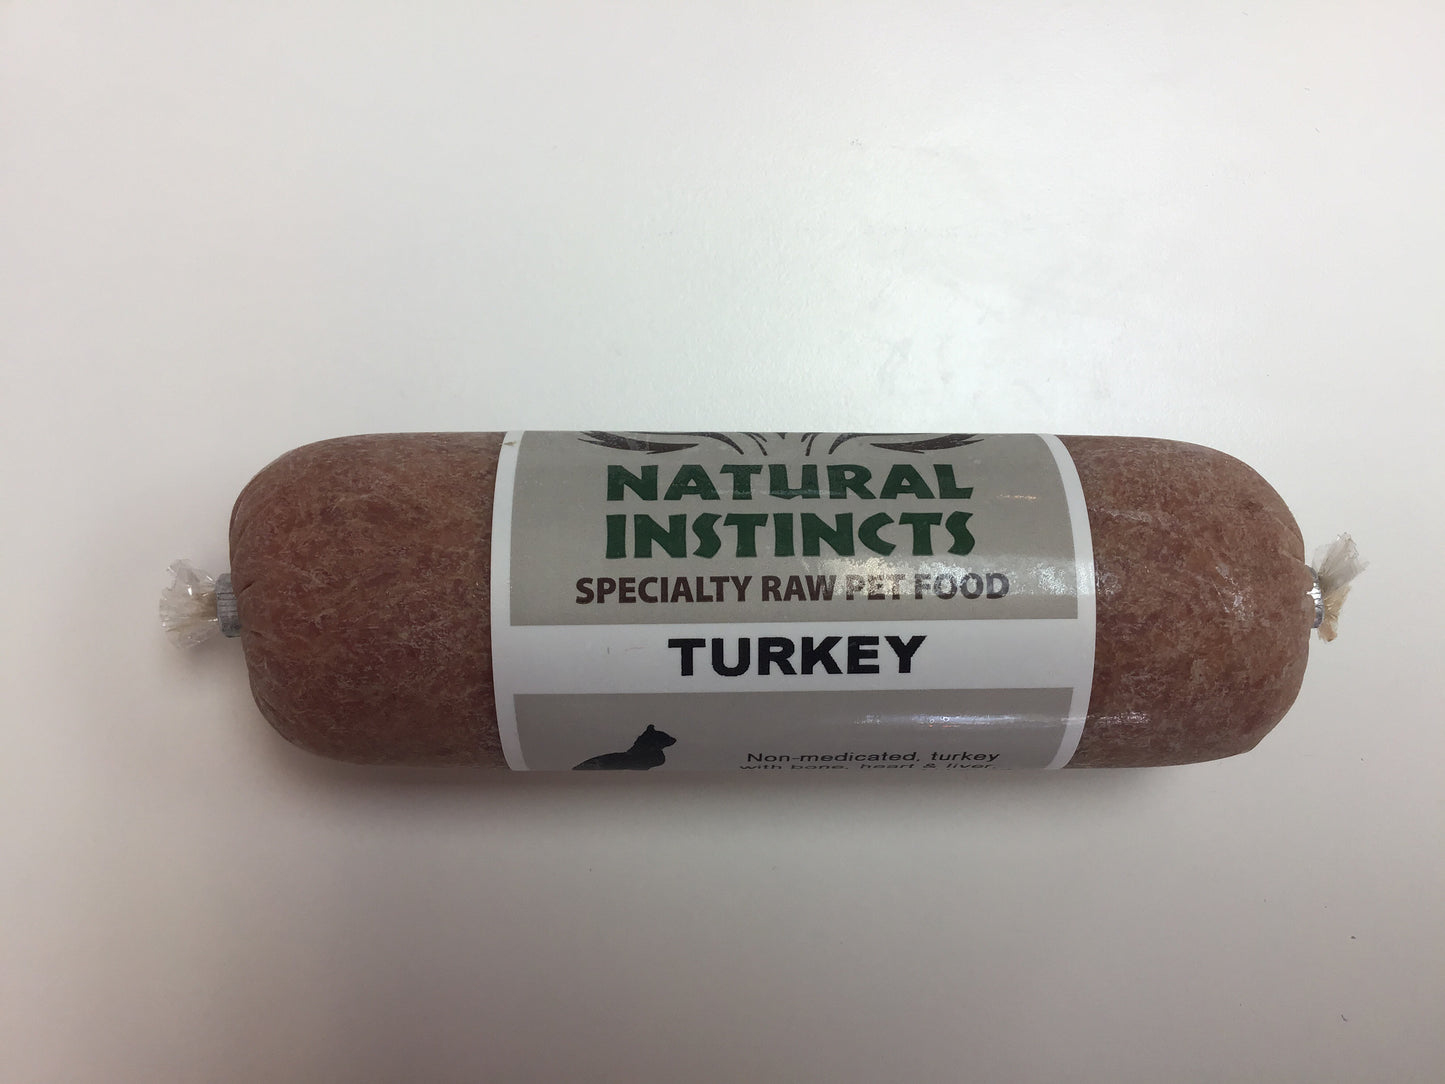 NATURAL INSTINCTS Raw Turkey Non-Medicated, 250g